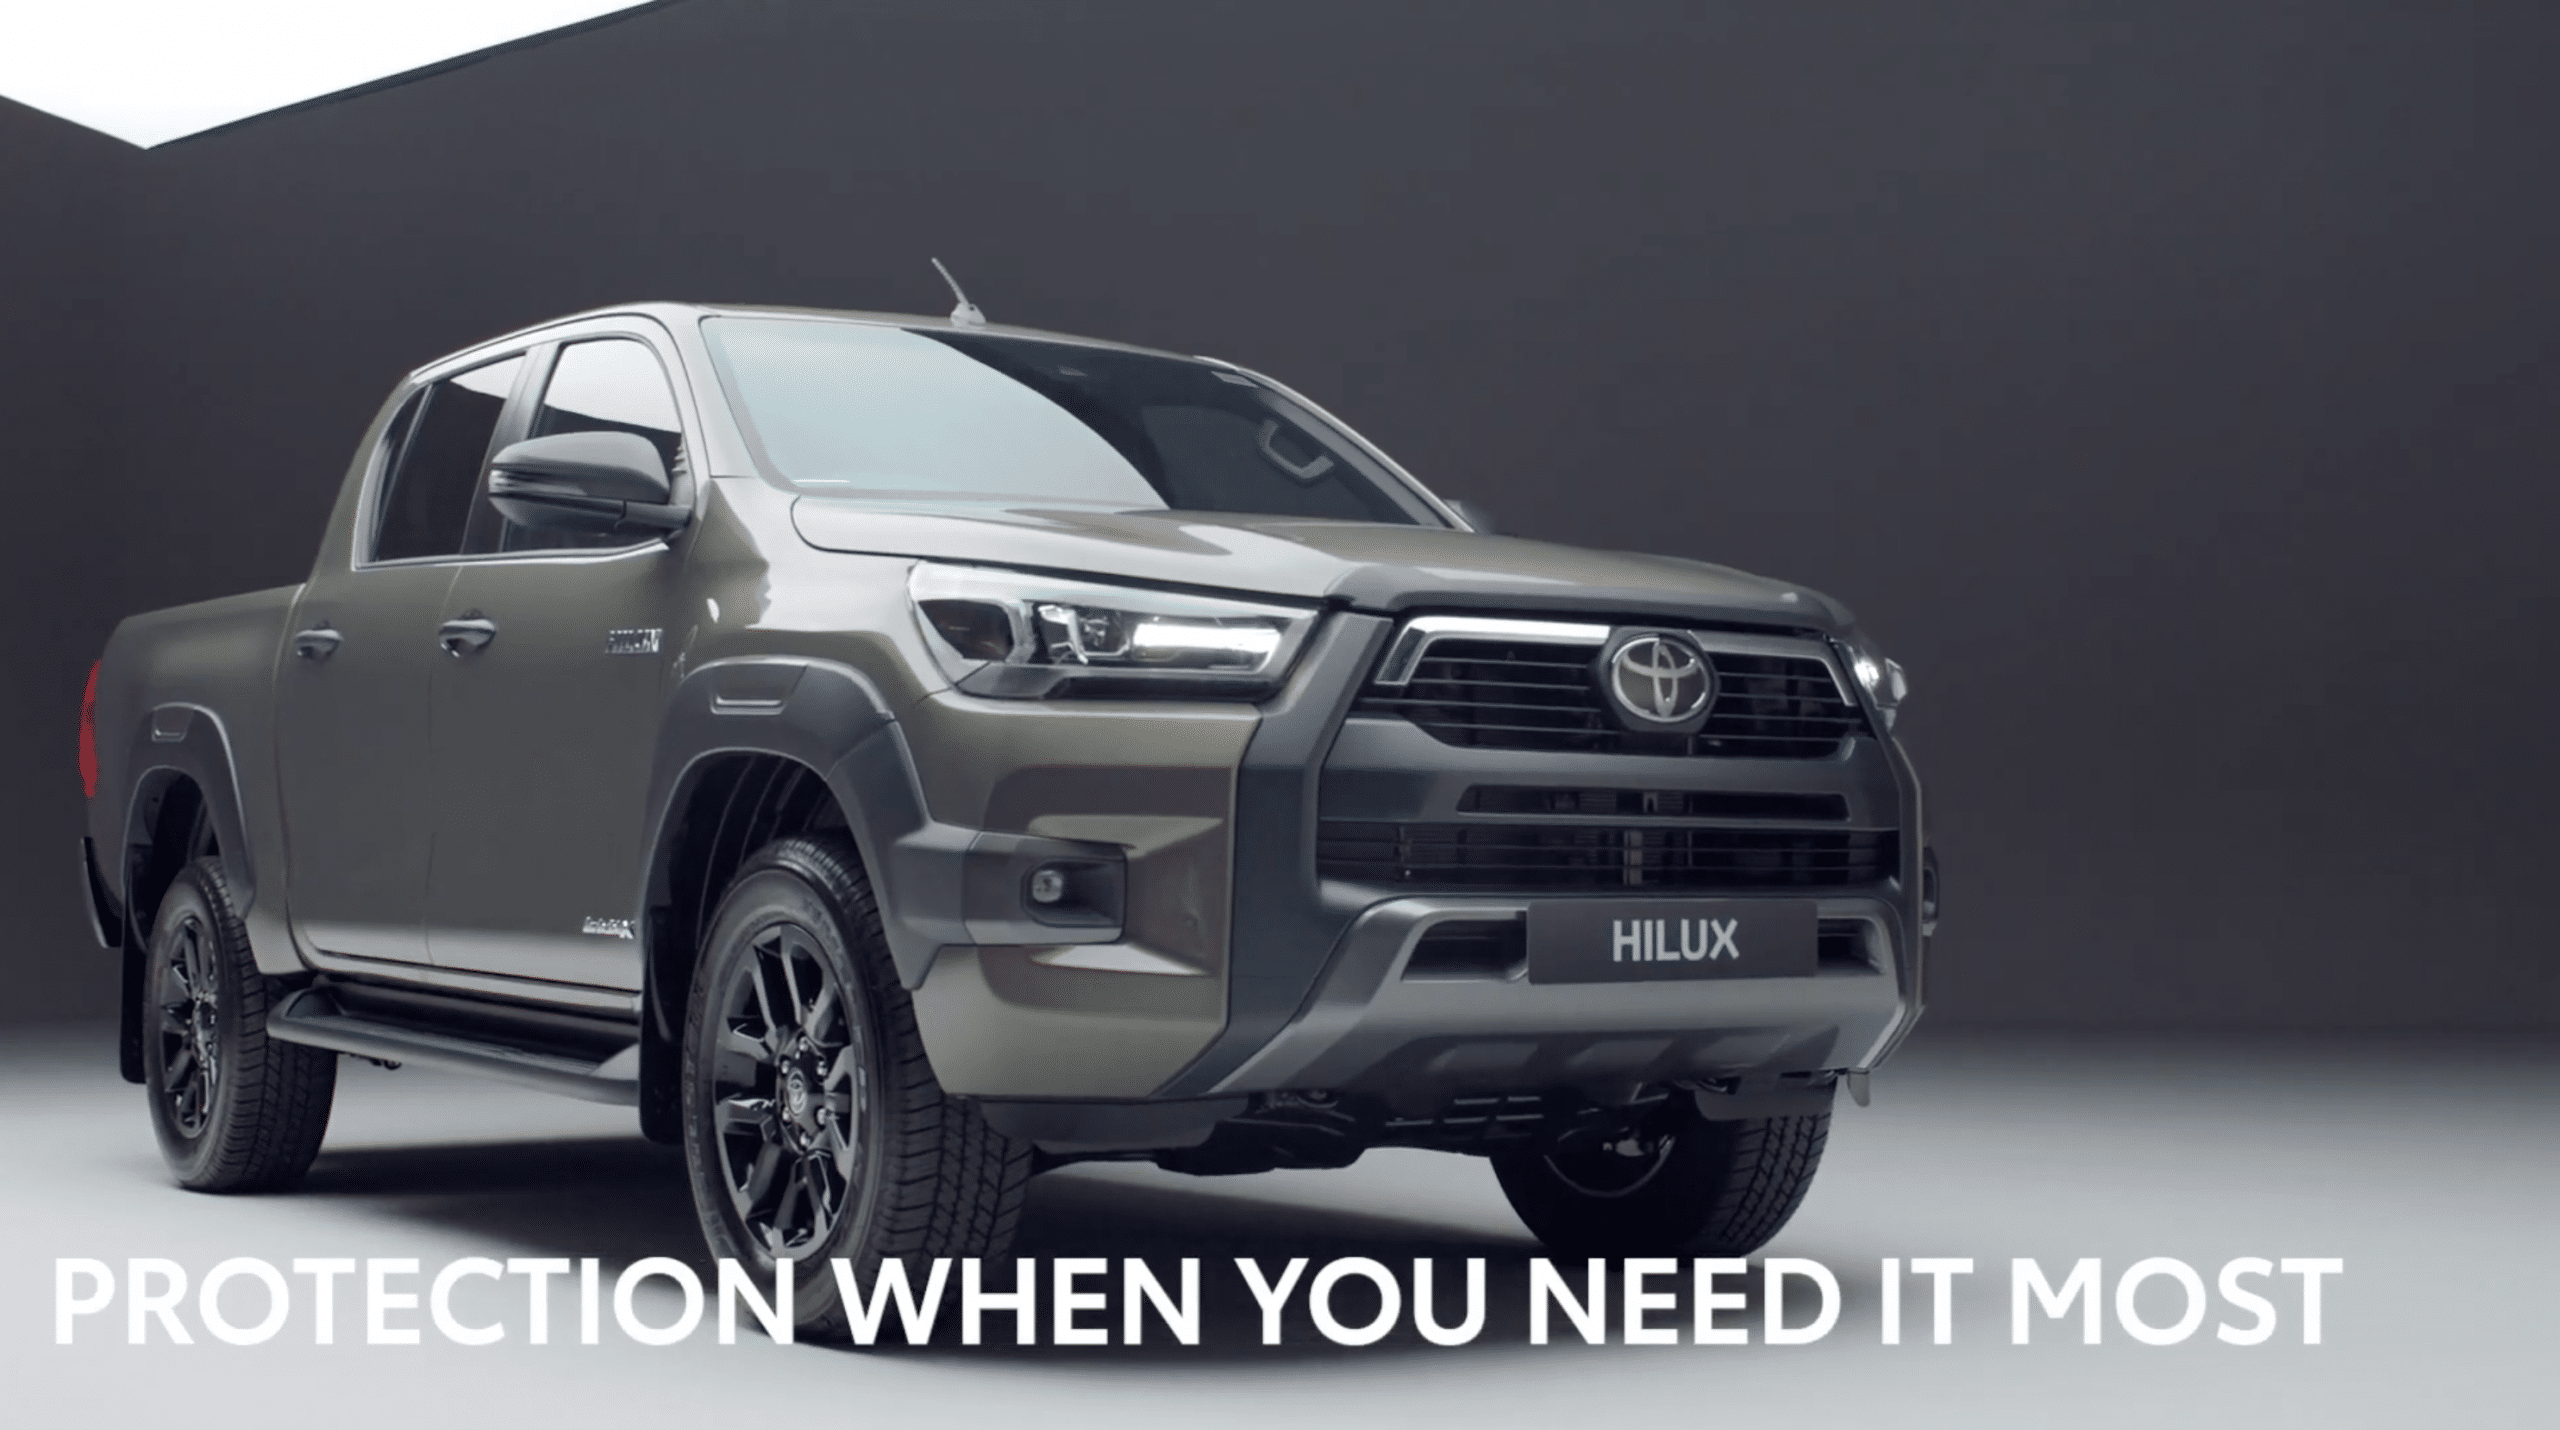 Toyota Hilux screen says protection when you need it most